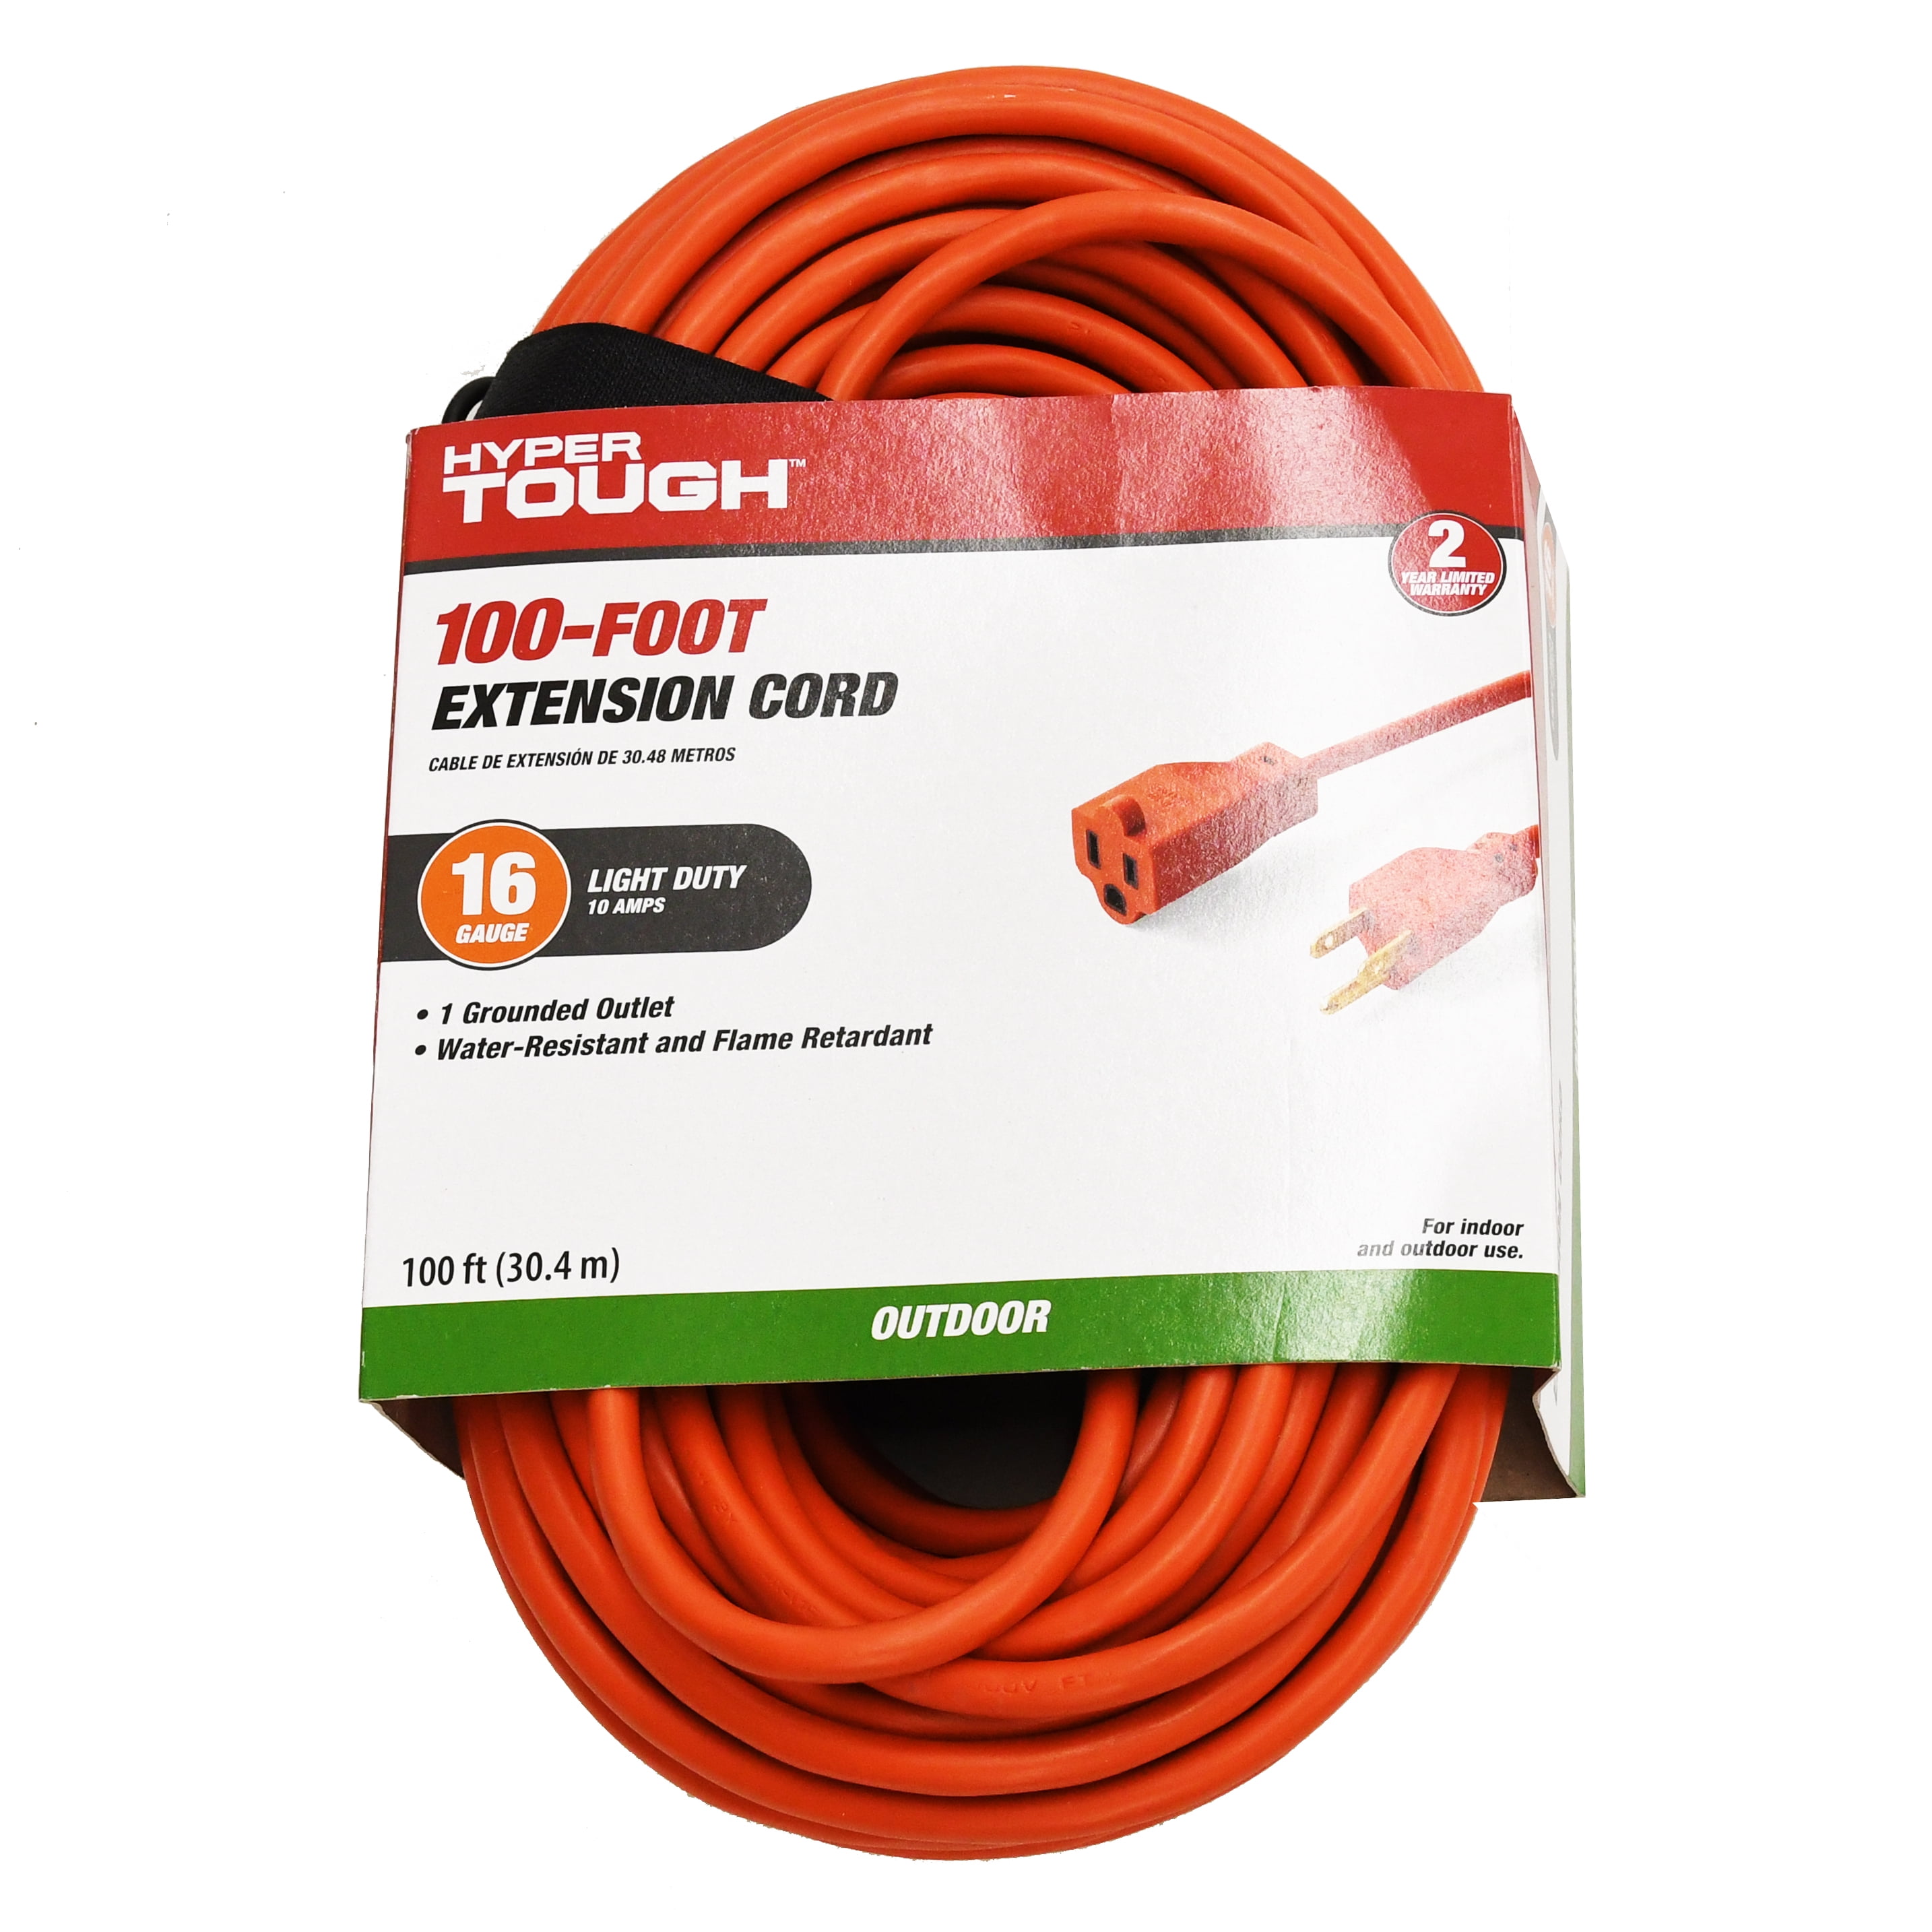 Complete Home Outdoor Extension Cord 40 ft Orange